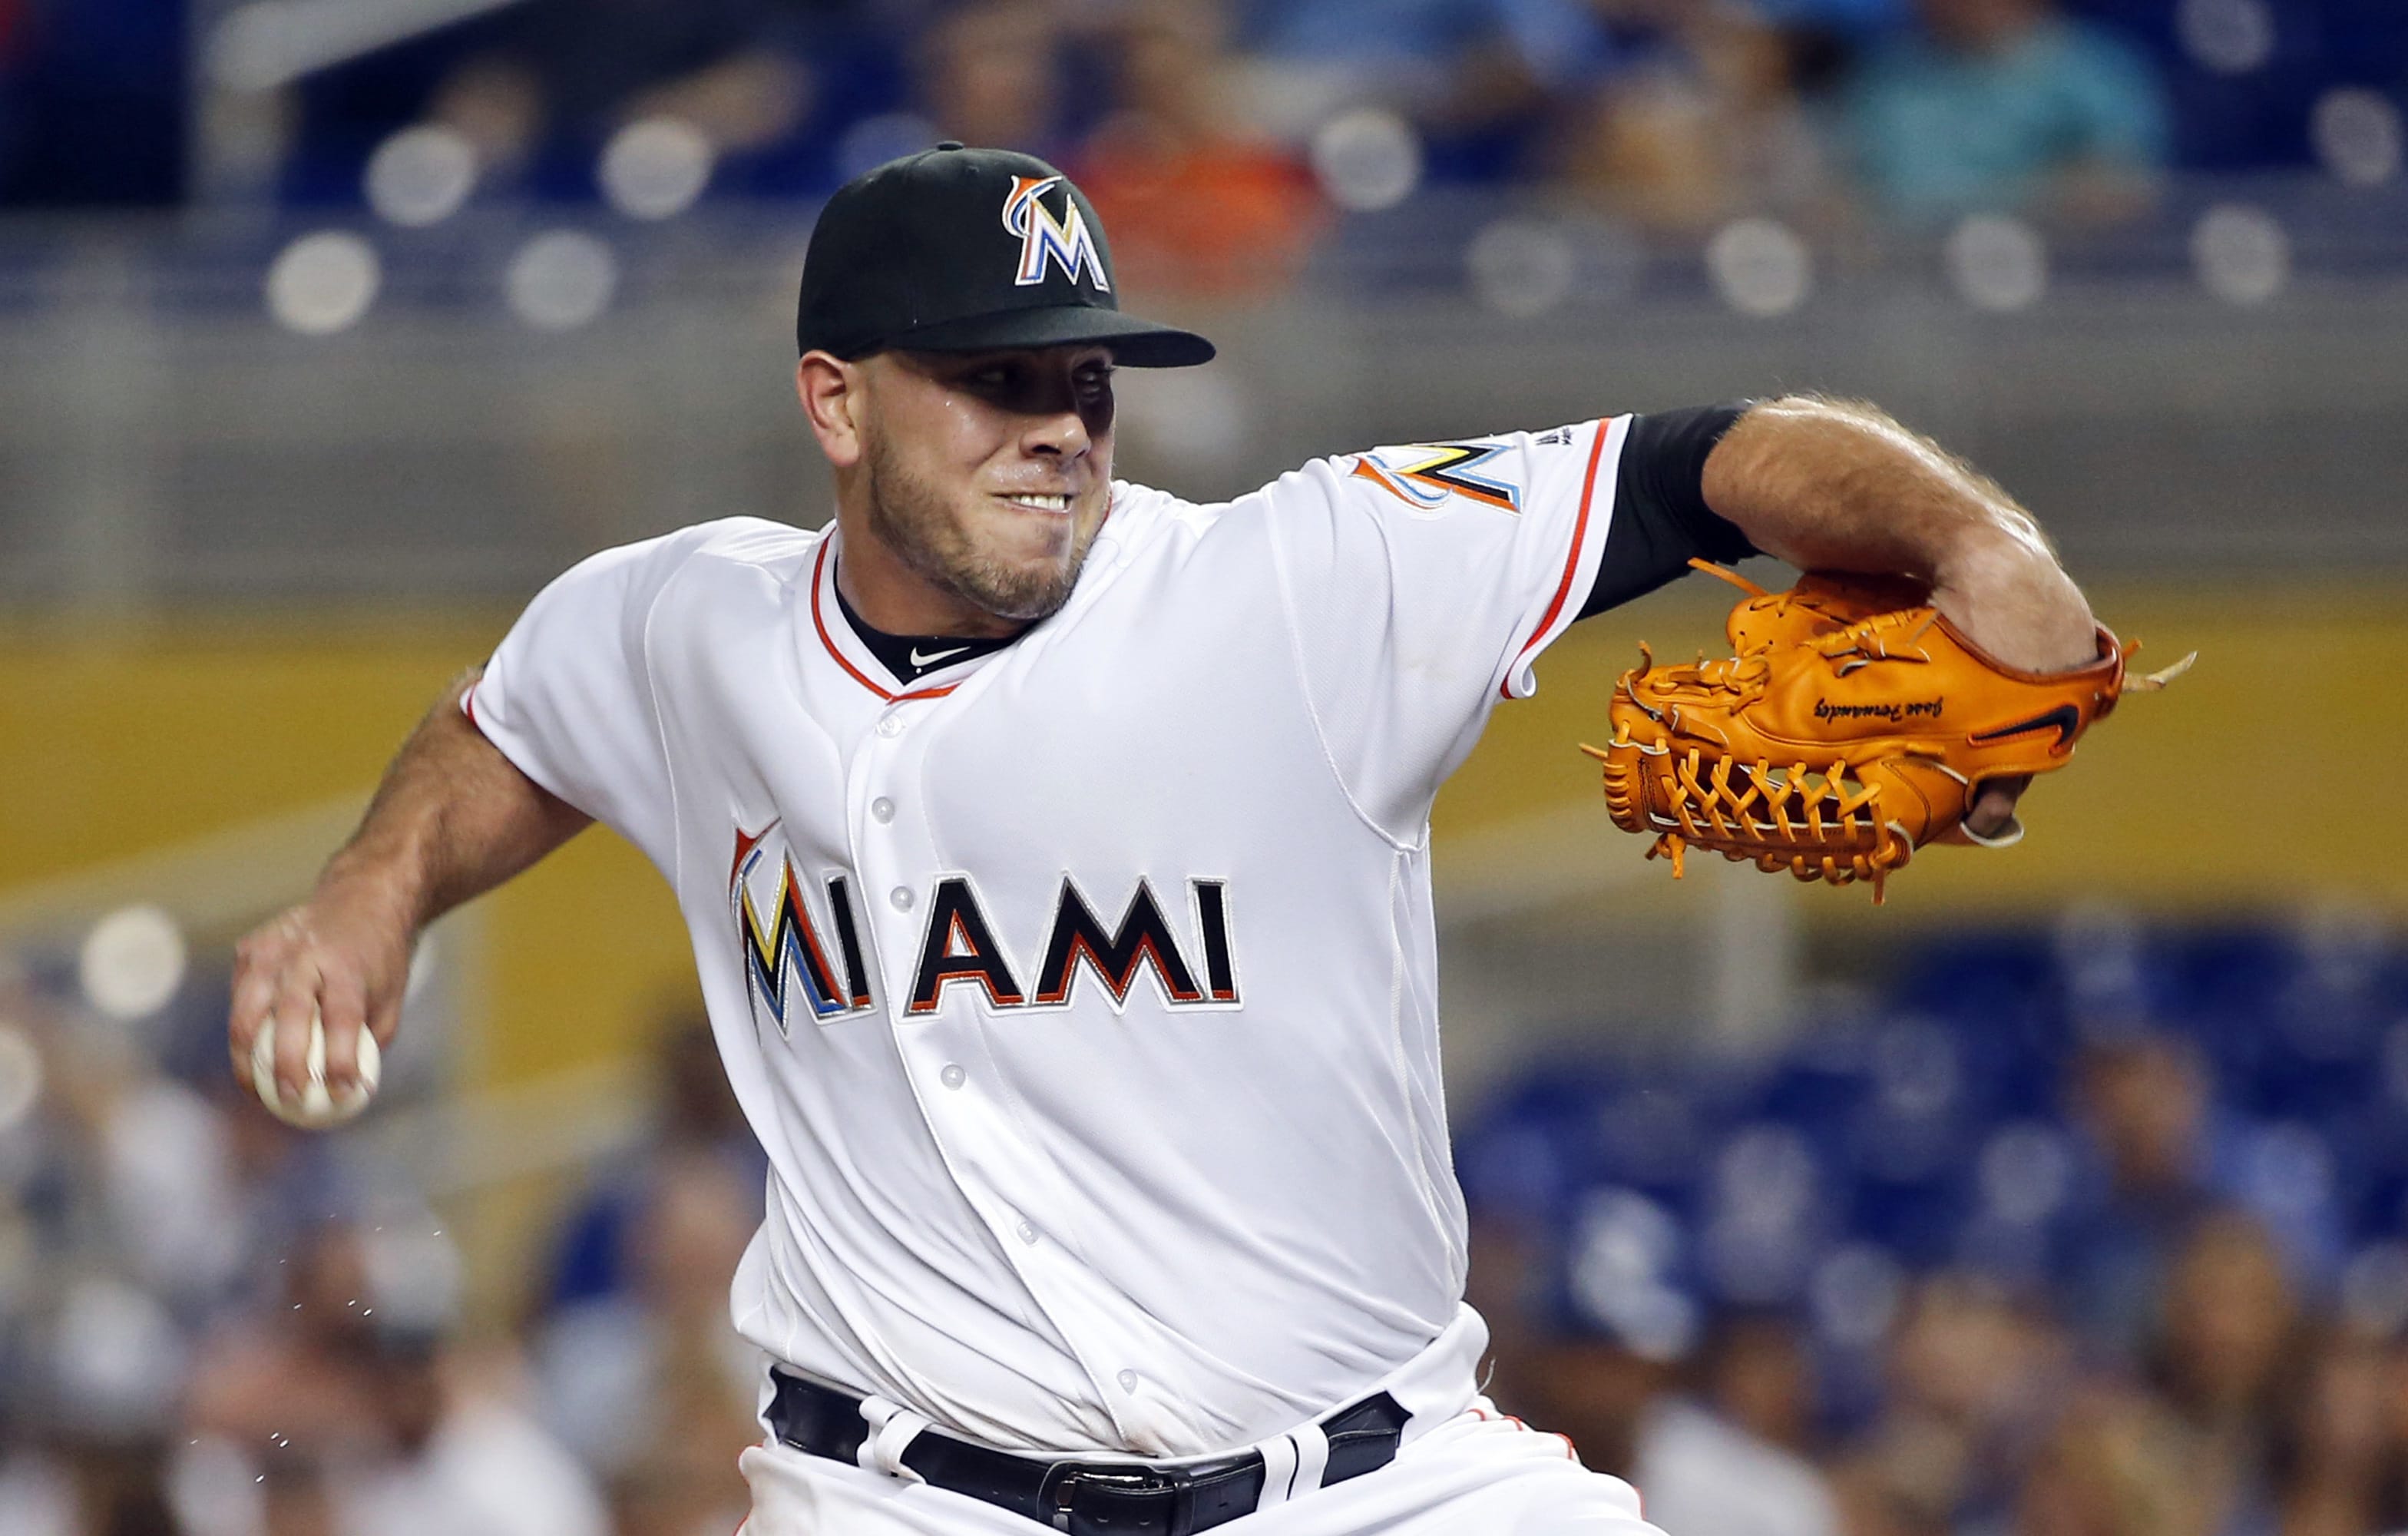 The Miami Marlins announced Sunday, Sept. 25, 2016, that ace right-hander Jose Fernandez died. The U.S. Coast Guard says Fernandez was one of three people killed in a boat crash off Miami Beach early Sunday.